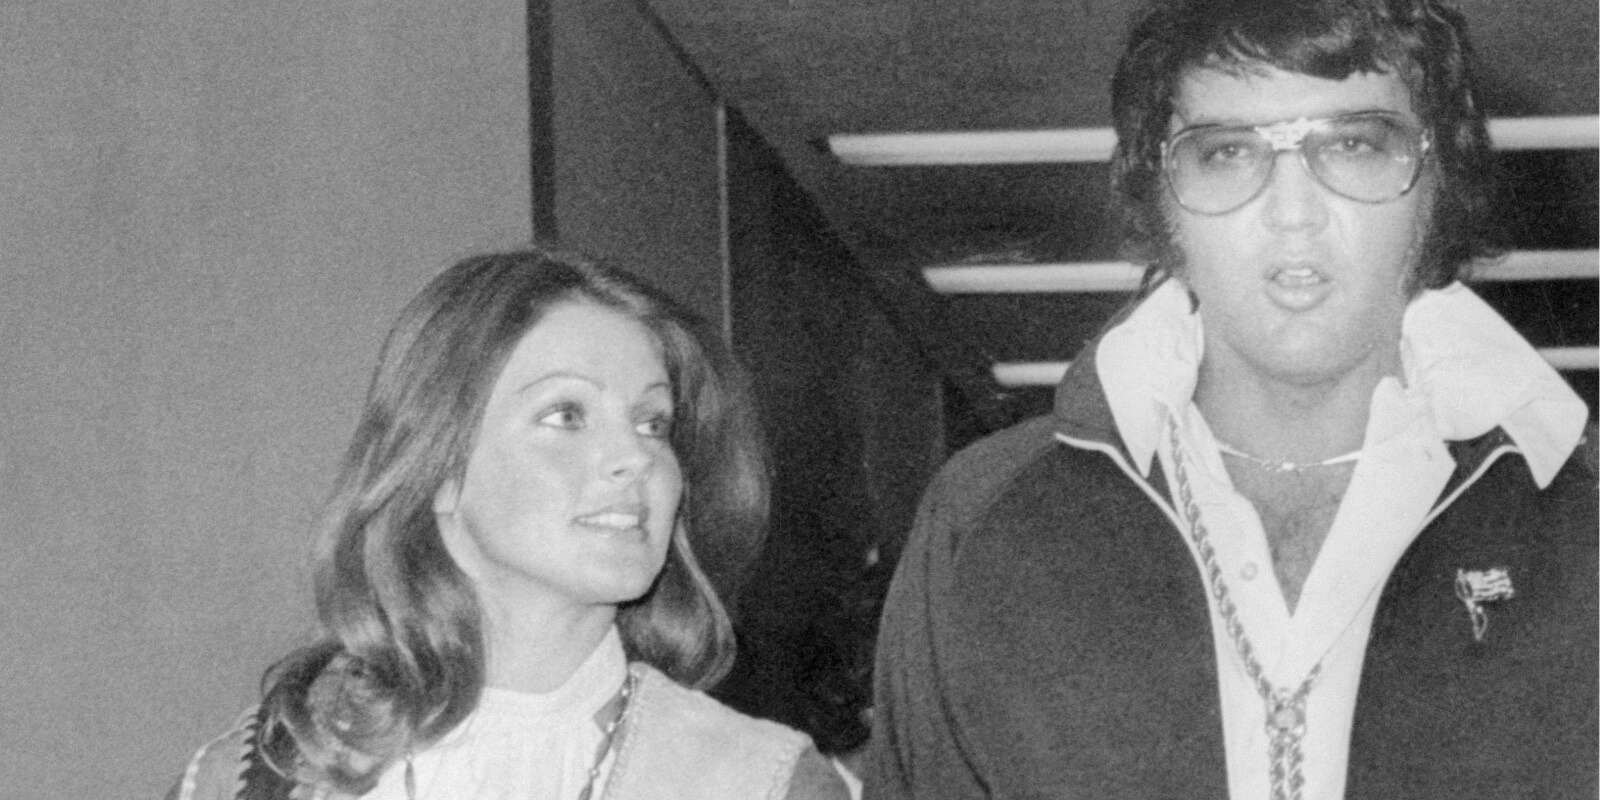 Priscilla Presley and Elvis Presley leave a Los Angeles courthouse the day their divorce was finalized.